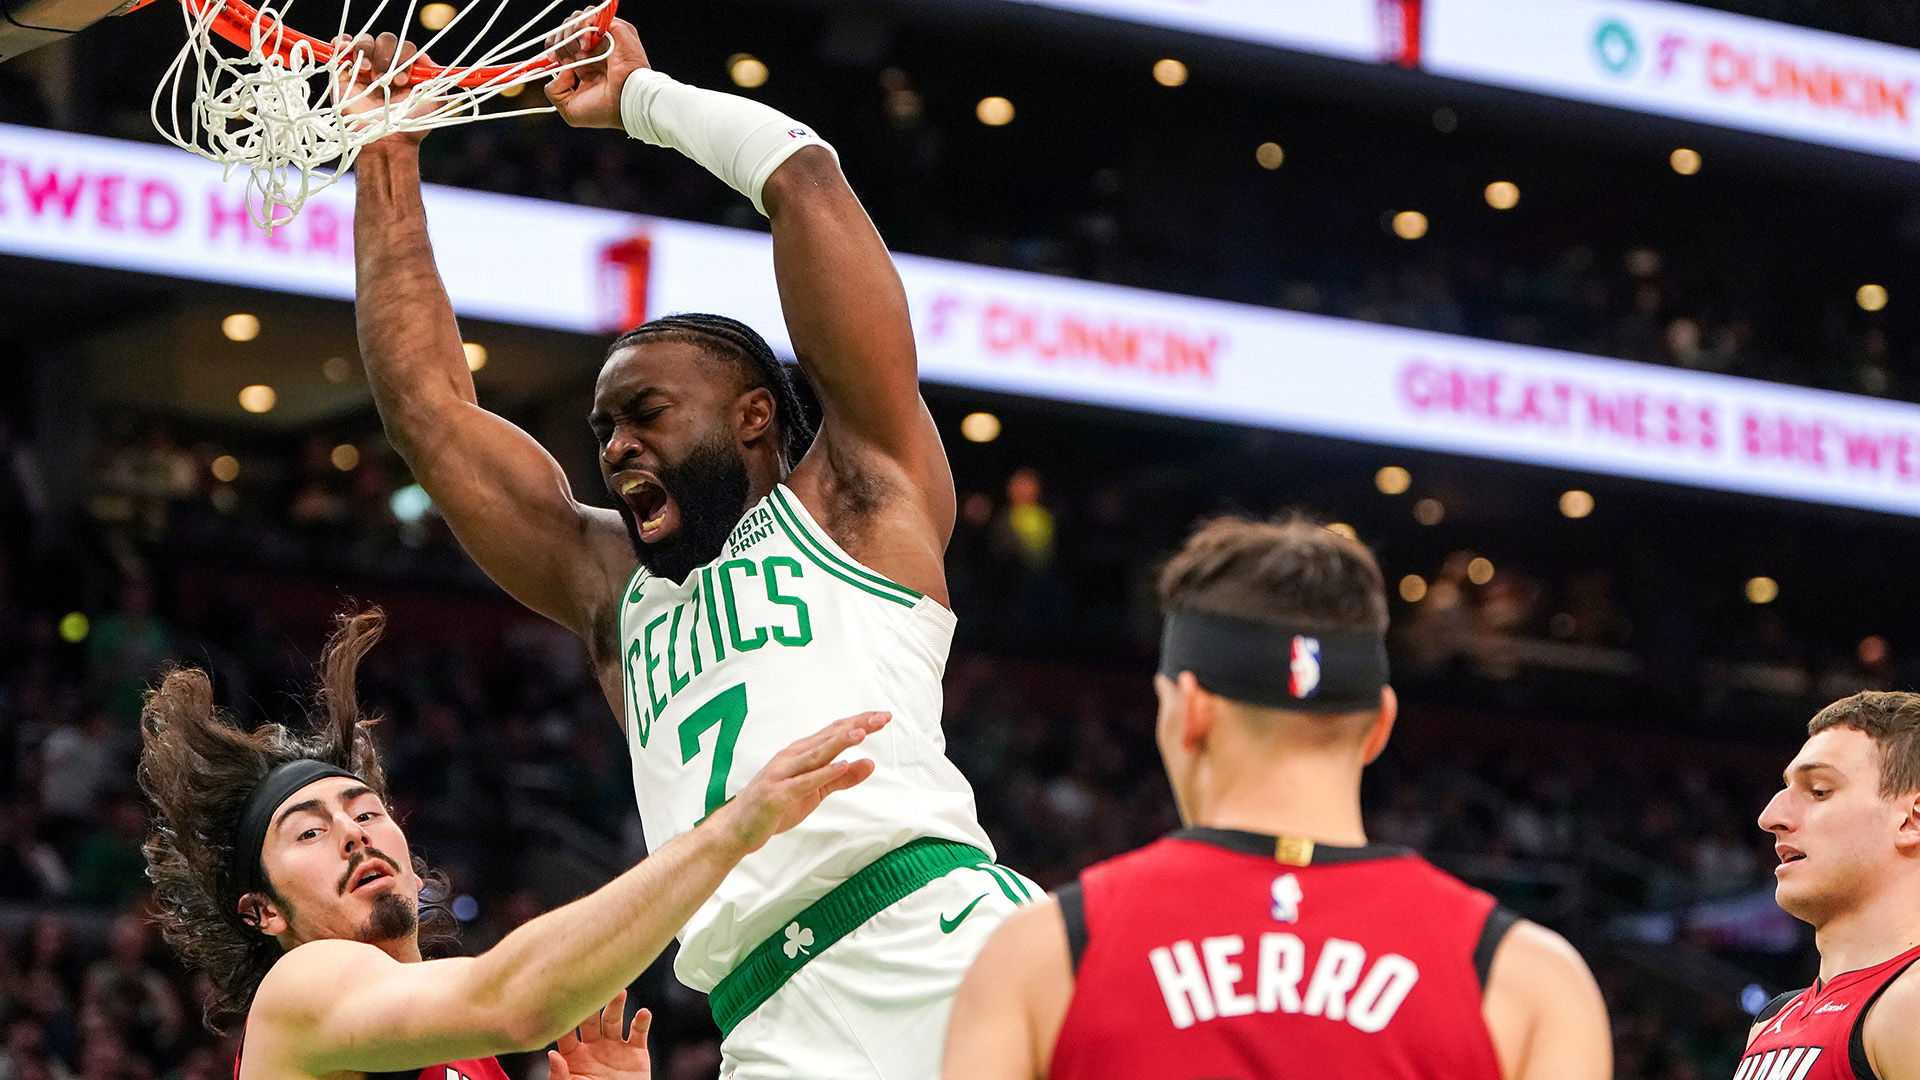 Boston, MA - April 21: Boston Celtics guard Jaylen Brown lets out a howl after flushing down a dunk during the first quarter. (Photo by Barry Chin/The Boston Globe via Getty Images)